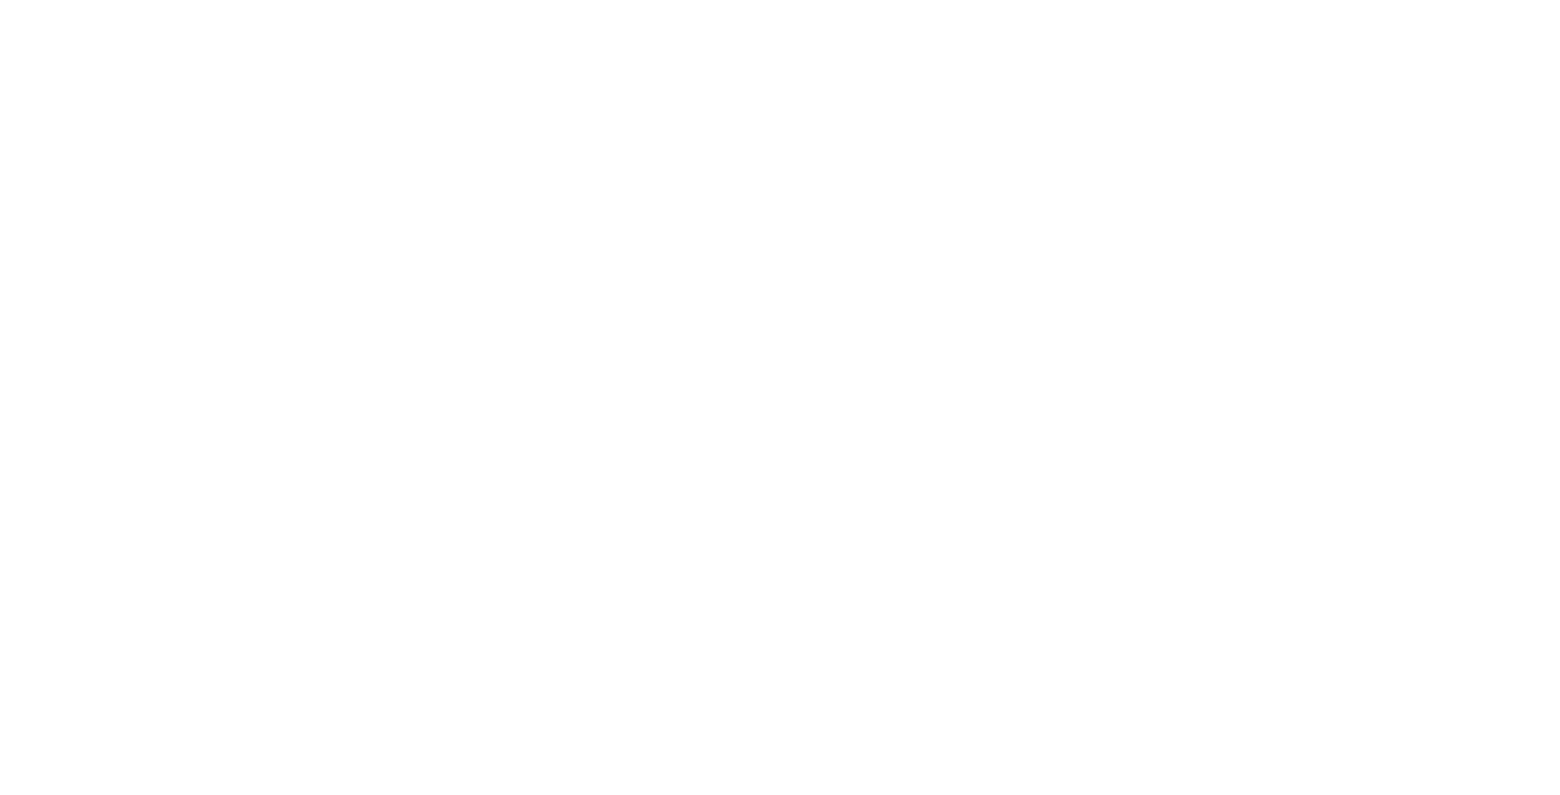 Qatar General Insurance & Reinsurance Company logo large for dark backgrounds (transparent PNG)